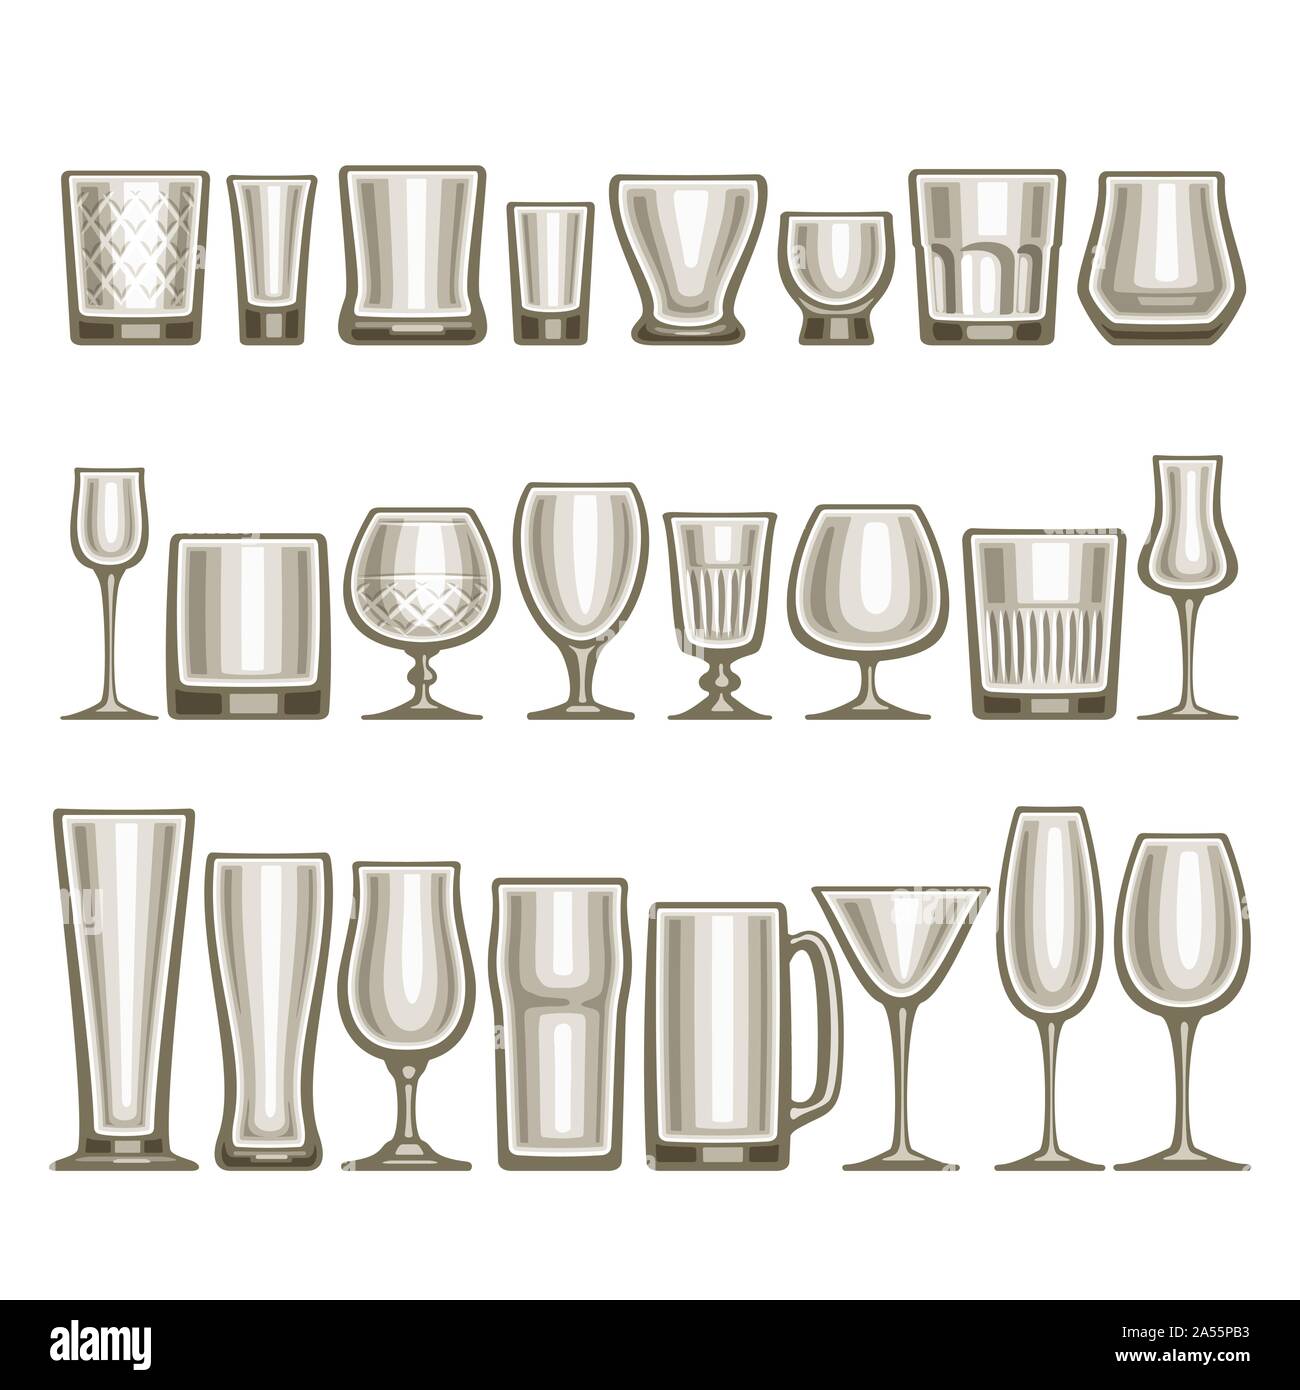 https://c8.alamy.com/comp/2A55PB3/vector-set-of-different-glassware-24-empty-glass-cups-various-shape-for-alcohol-drinks-and-cocktails-collection-of-grey-shiny-mock-up-icons-for-bar-2A55PB3.jpg